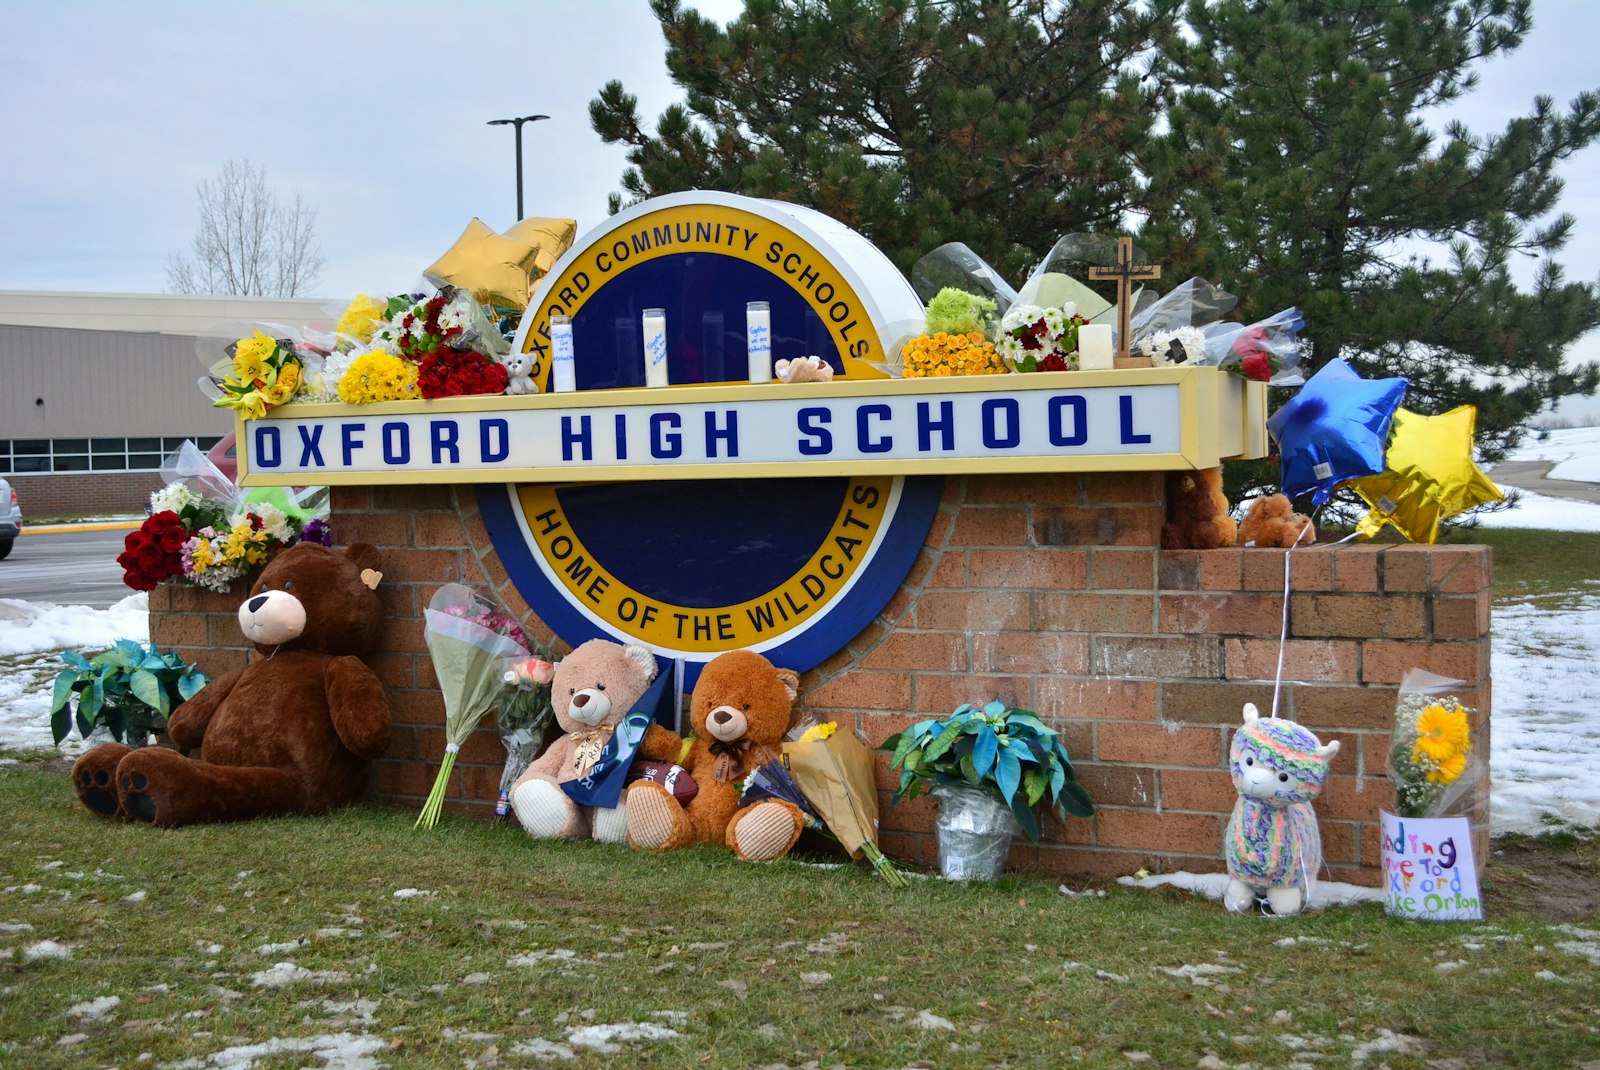 Stuffed animals, candles and balloons adorn the sign outside Oxford High School days after a mass shooting at the northern Oakland County school claimed four lives and injured seven others Nov. 30, 2021. (Michael Stechschulte | Detroit Catholic)